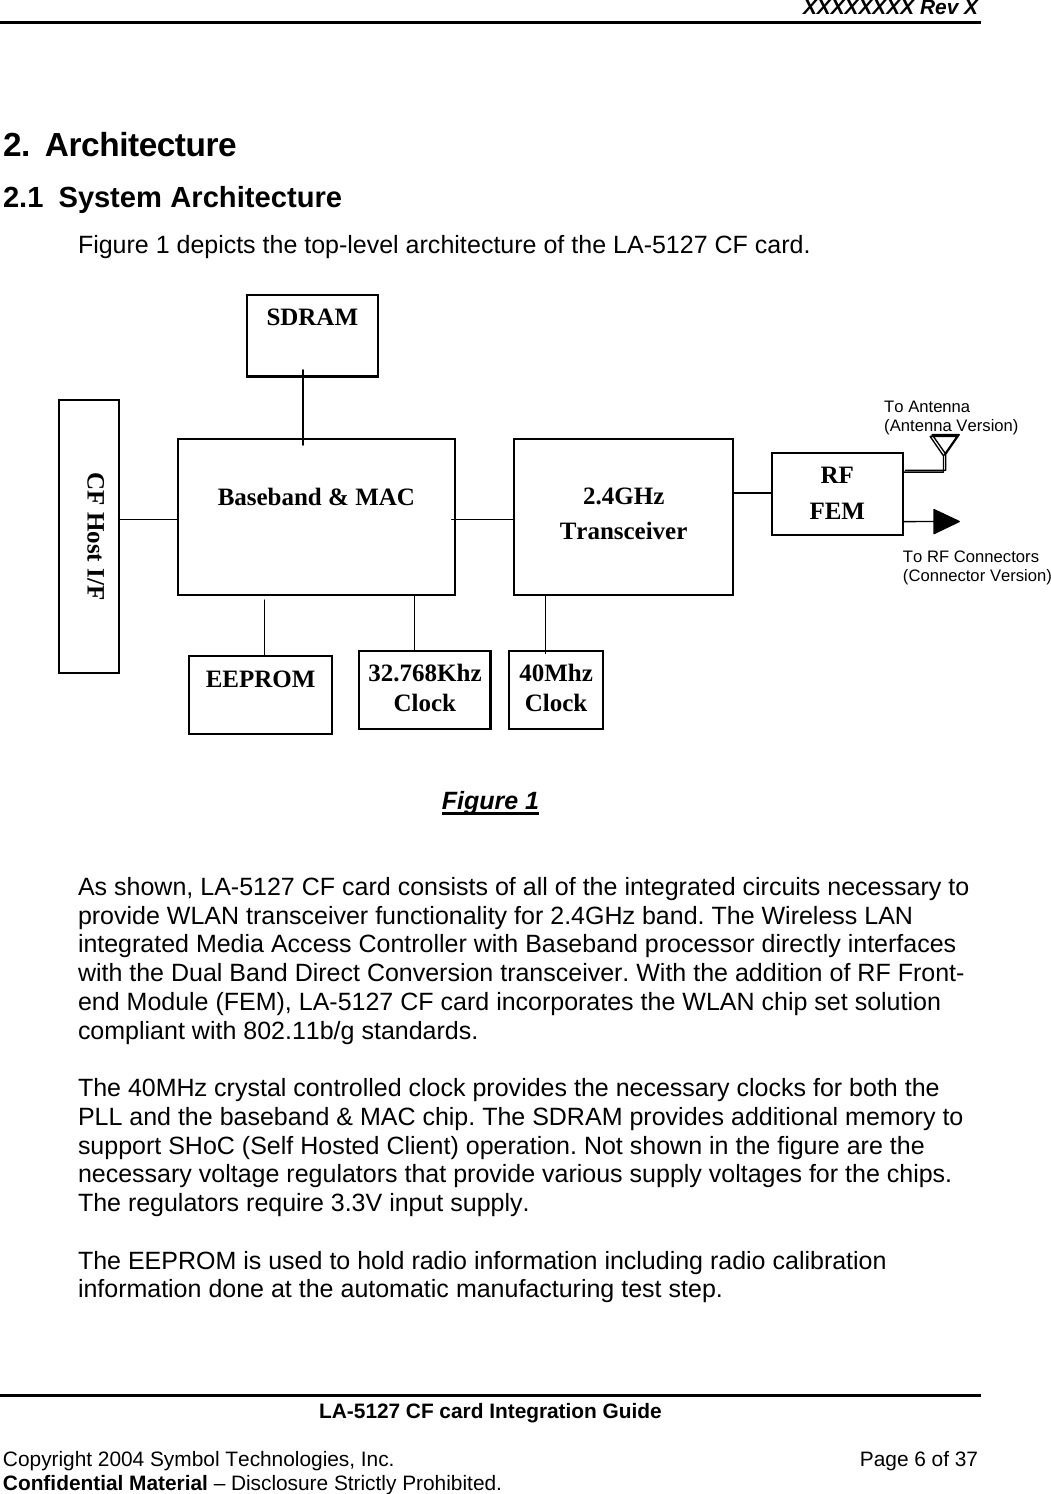 XXXXXXXX Rev X    LA-5127 CF card Integration Guide  Copyright 2004 Symbol Technologies, Inc.    Page 6 of 37 Confidential Material – Disclosure Strictly Prohibited. 2. Architecture  2.1 System Architecture Figure 1 depicts the top-level architecture of the LA-5127 CF card.                            Figure 1   As shown, LA-5127 CF card consists of all of the integrated circuits necessary to provide WLAN transceiver functionality for 2.4GHz band. The Wireless LAN integrated Media Access Controller with Baseband processor directly interfaces with the Dual Band Direct Conversion transceiver. With the addition of RF Front-end Module (FEM), LA-5127 CF card incorporates the WLAN chip set solution compliant with 802.11b/g standards.  The 40MHz crystal controlled clock provides the necessary clocks for both the PLL and the baseband &amp; MAC chip. The SDRAM provides additional memory to support SHoC (Self Hosted Client) operation. Not shown in the figure are the necessary voltage regulators that provide various supply voltages for the chips. The regulators require 3.3V input supply.  The EEPROM is used to hold radio information including radio calibration information done at the automatic manufacturing test step.      2.4GHz Transceiver  CF Host I/F RF FEM  Baseband &amp; MAC 40Mhz Clock EEPROM SDRAM  32.768Khz Clock To Antenna (Antenna Version) To RF Connectors (Connector Version)